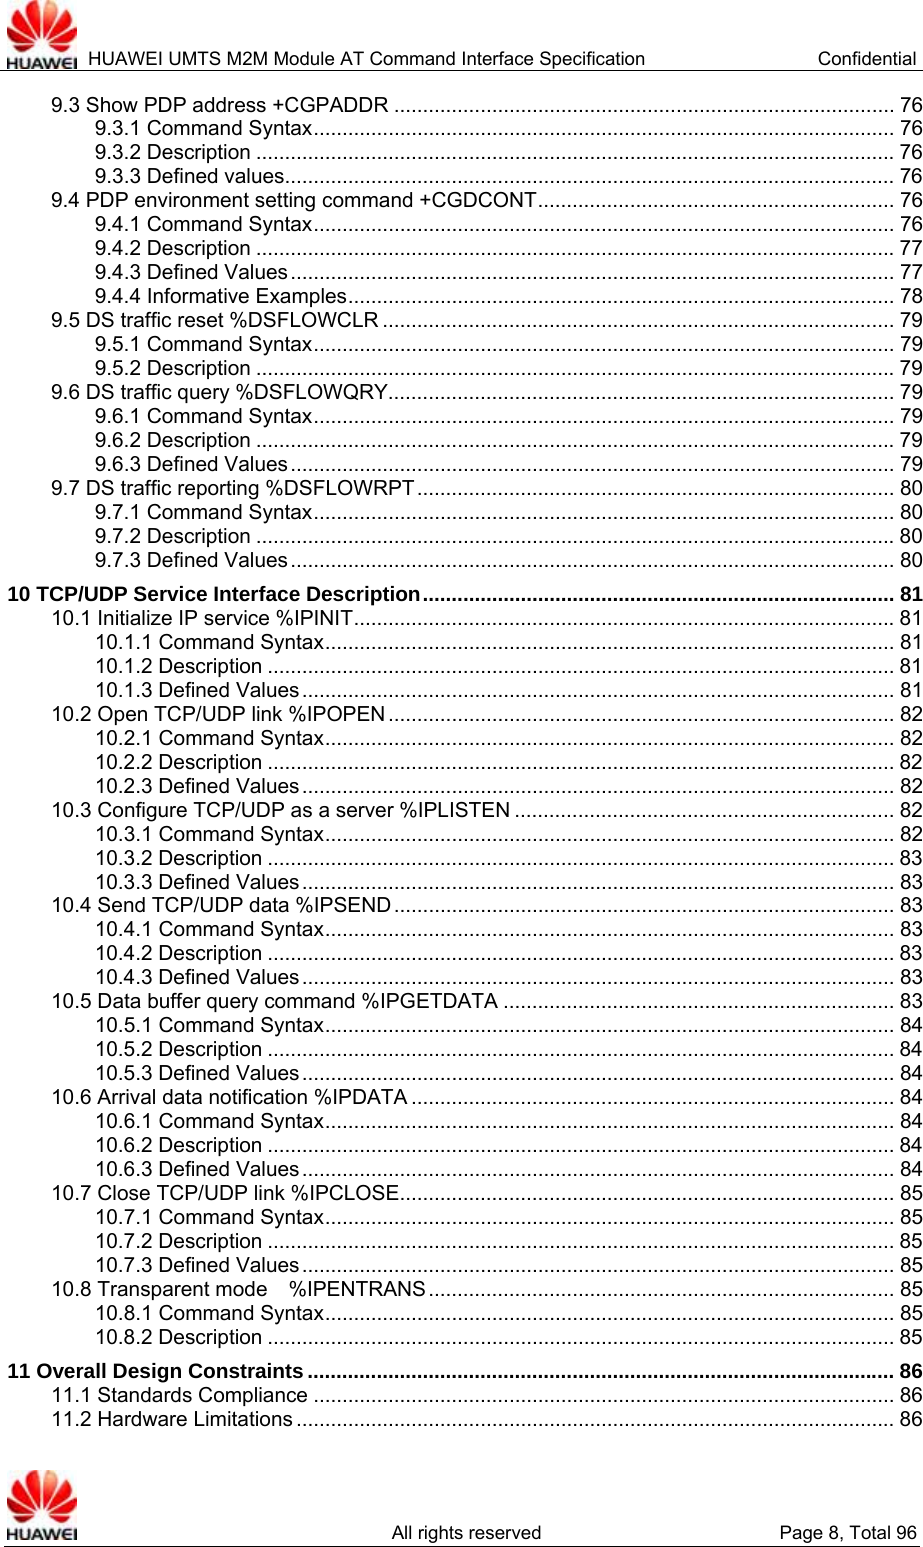  HUAWEI UMTS M2M Module AT Command Interface Specification  Confidential   All rights reserved  Page 8, Total 96 9.3 Show PDP address +CGPADDR ....................................................................................... 76 9.3.1 Command Syntax..................................................................................................... 76 9.3.2 Description ...............................................................................................................76 9.3.3 Defined values.......................................................................................................... 76 9.4 PDP environment setting command +CGDCONT.............................................................. 76 9.4.1 Command Syntax..................................................................................................... 76 9.4.2 Description ...............................................................................................................77 9.4.3 Defined Values......................................................................................................... 77 9.4.4 Informative Examples............................................................................................... 78 9.5 DS traffic reset %DSFLOWCLR ......................................................................................... 79 9.5.1 Command Syntax..................................................................................................... 79 9.5.2 Description ...............................................................................................................79 9.6 DS traffic query %DSFLOWQRY........................................................................................ 79 9.6.1 Command Syntax..................................................................................................... 79 9.6.2 Description ...............................................................................................................79 9.6.3 Defined Values......................................................................................................... 79 9.7 DS traffic reporting %DSFLOWRPT................................................................................... 80 9.7.1 Command Syntax..................................................................................................... 80 9.7.2 Description ...............................................................................................................80 9.7.3 Defined Values......................................................................................................... 80 10 TCP/UDP Service Interface Description.................................................................................. 81 10.1 Initialize IP service %IPINIT..............................................................................................81 10.1.1 Command Syntax................................................................................................... 81 10.1.2 Description ............................................................................................................. 81 10.1.3 Defined Values....................................................................................................... 81 10.2 Open TCP/UDP link %IPOPEN ........................................................................................ 82 10.2.1 Command Syntax................................................................................................... 82 10.2.2 Description ............................................................................................................. 82 10.2.3 Defined Values....................................................................................................... 82 10.3 Configure TCP/UDP as a server %IPLISTEN .................................................................. 82 10.3.1 Command Syntax................................................................................................... 82 10.3.2 Description ............................................................................................................. 83 10.3.3 Defined Values....................................................................................................... 83 10.4 Send TCP/UDP data %IPSEND....................................................................................... 83 10.4.1 Command Syntax................................................................................................... 83 10.4.2 Description ............................................................................................................. 83 10.4.3 Defined Values....................................................................................................... 83 10.5 Data buffer query command %IPGETDATA .................................................................... 83 10.5.1 Command Syntax................................................................................................... 84 10.5.2 Description ............................................................................................................. 84 10.5.3 Defined Values....................................................................................................... 84 10.6 Arrival data notification %IPDATA .................................................................................... 84 10.6.1 Command Syntax................................................................................................... 84 10.6.2 Description ............................................................................................................. 84 10.6.3 Defined Values....................................................................................................... 84 10.7 Close TCP/UDP link %IPCLOSE...................................................................................... 85 10.7.1 Command Syntax................................................................................................... 85 10.7.2 Description ............................................................................................................. 85 10.7.3 Defined Values....................................................................................................... 85 10.8 Transparent mode  %IPENTRANS................................................................................. 85 10.8.1 Command Syntax................................................................................................... 85 10.8.2 Description ............................................................................................................. 85 11 Overall Design Constraints ...................................................................................................... 86 11.1 Standards Compliance ..................................................................................................... 86 11.2 Hardware Limitations ........................................................................................................ 86 